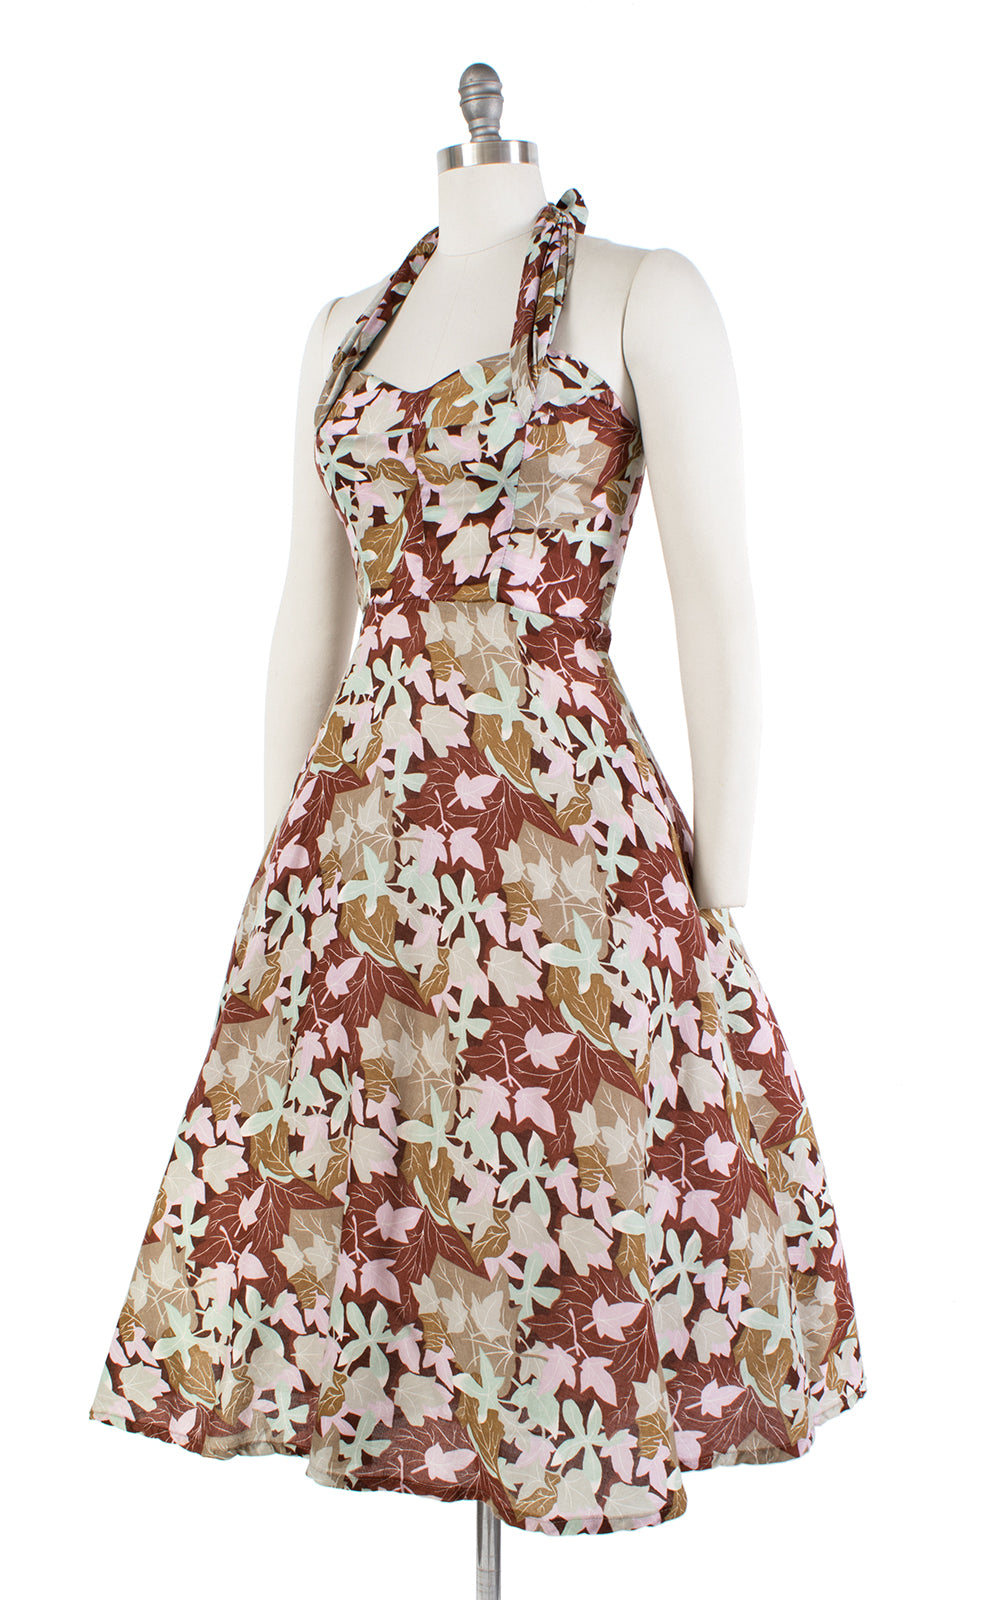 1950s Style Leaf Printed Halter Sundress with Pockets